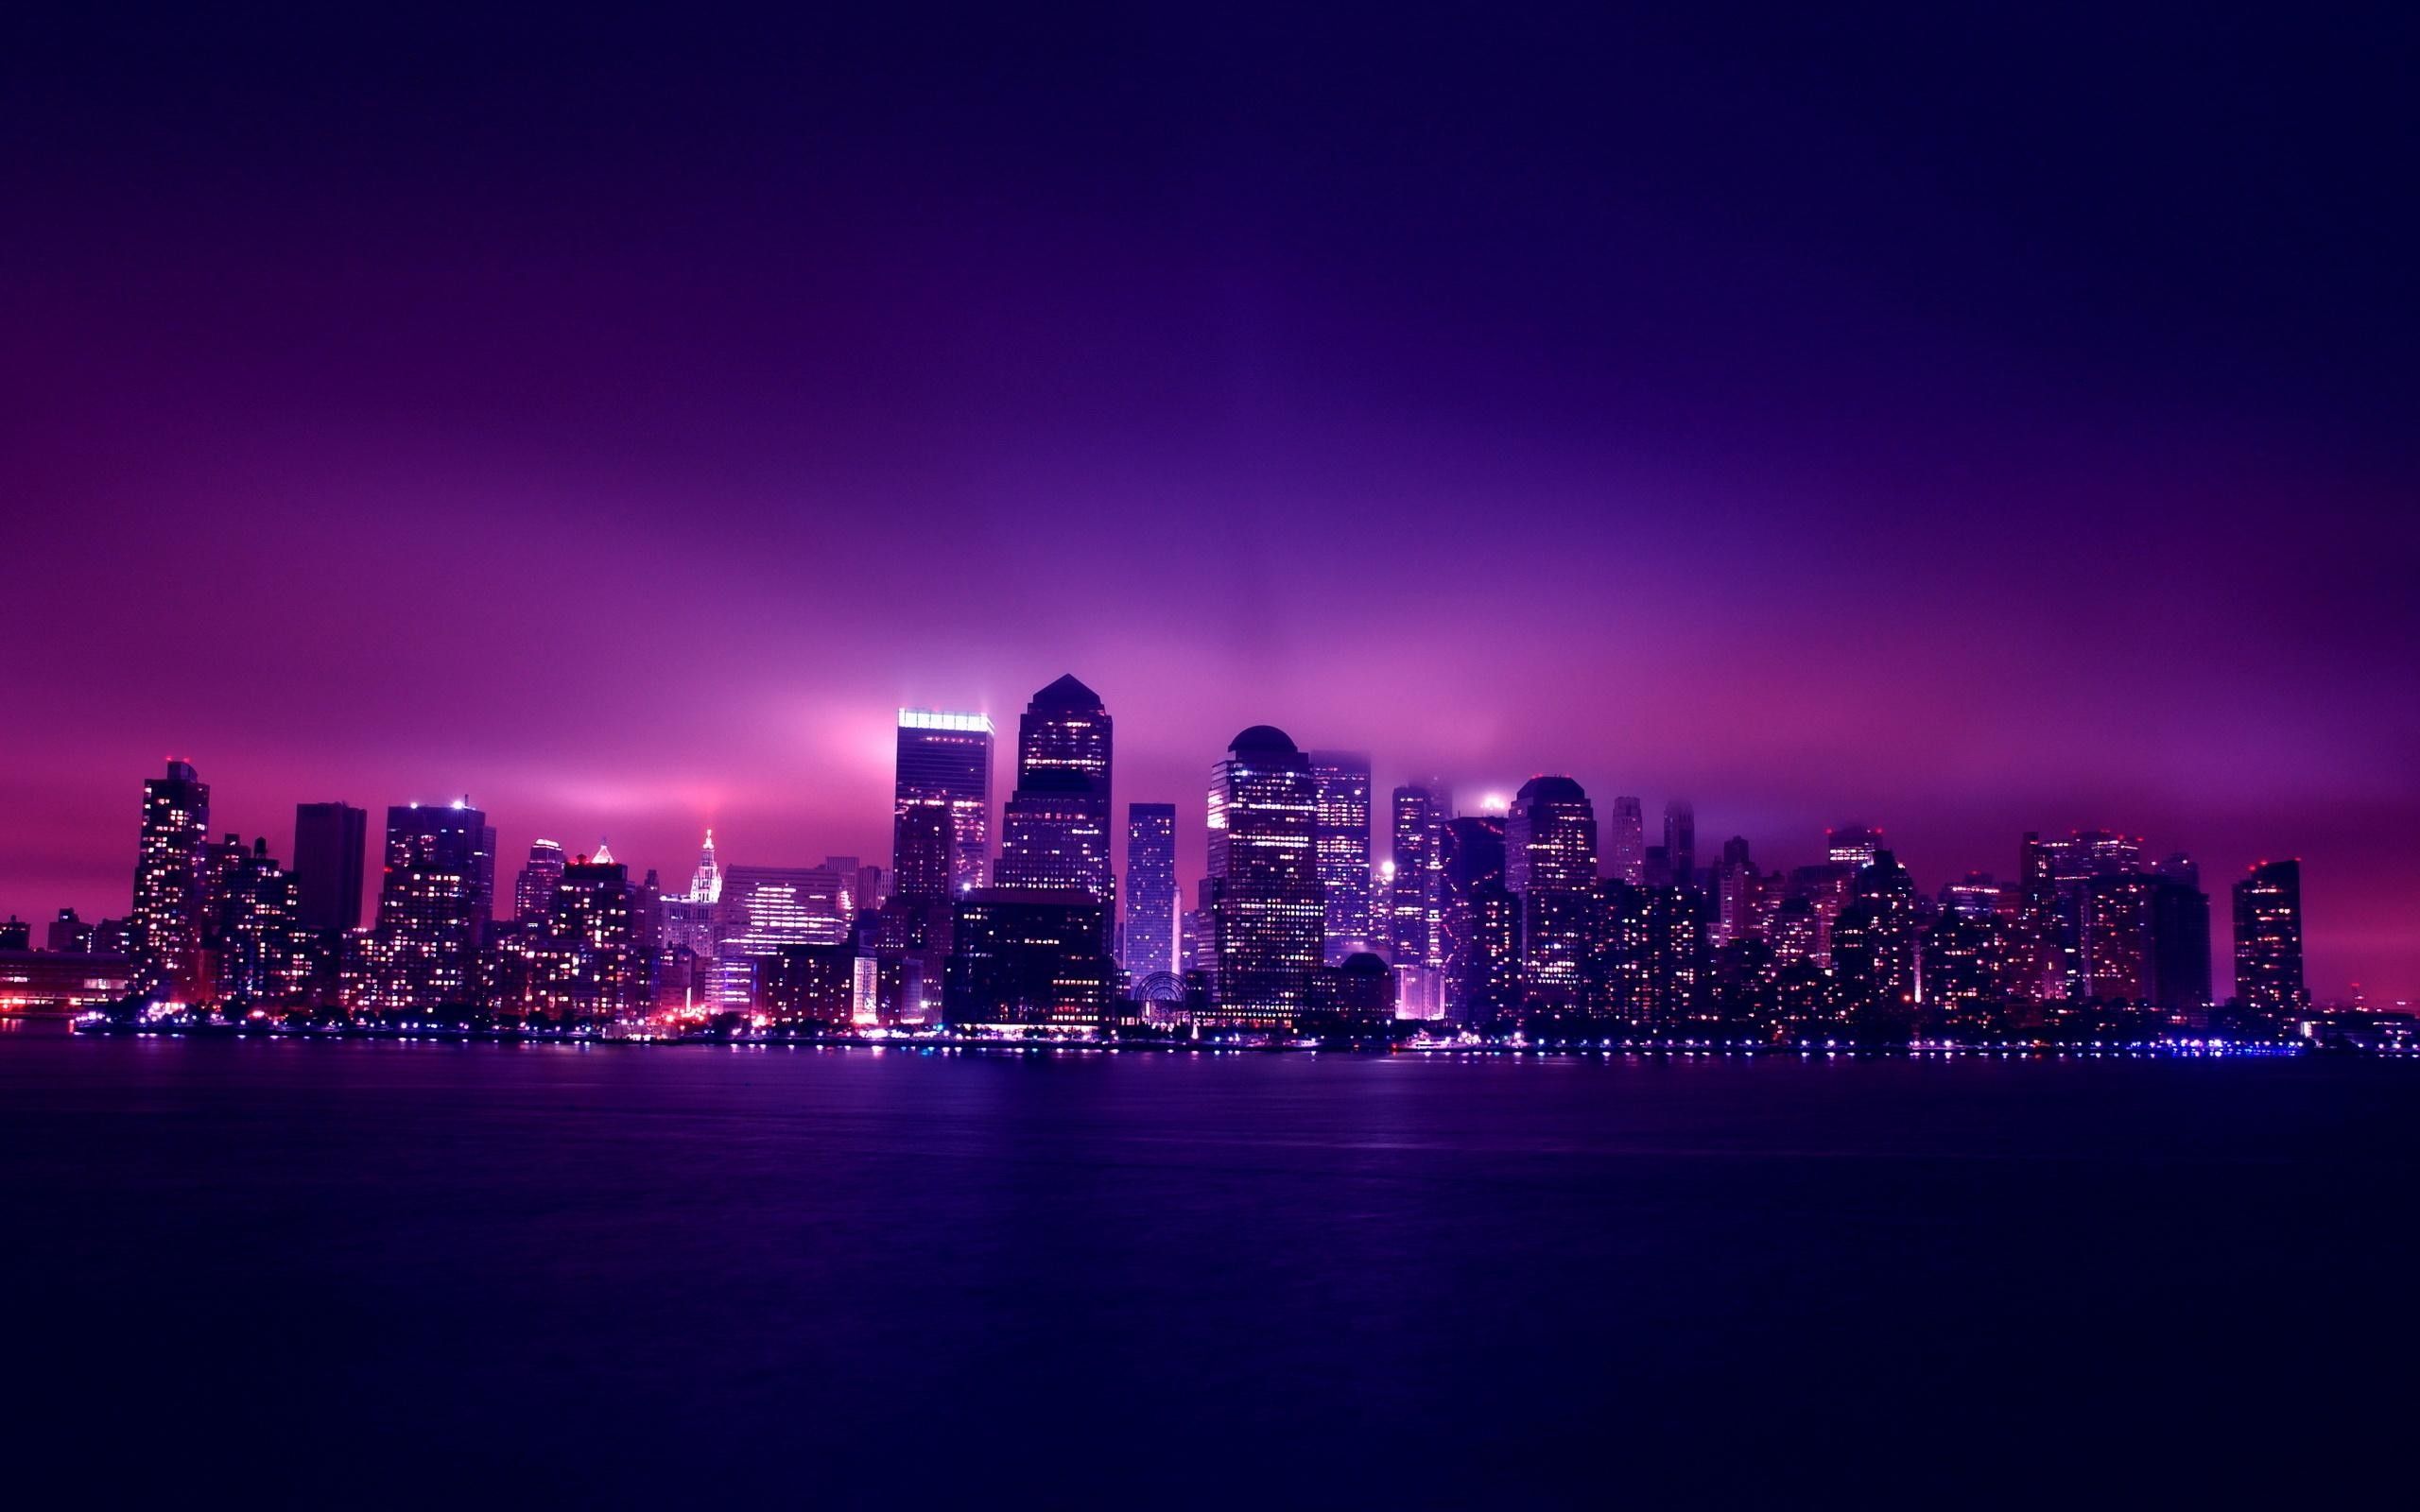 A purple night sky over a city by the sea - Purple quotes